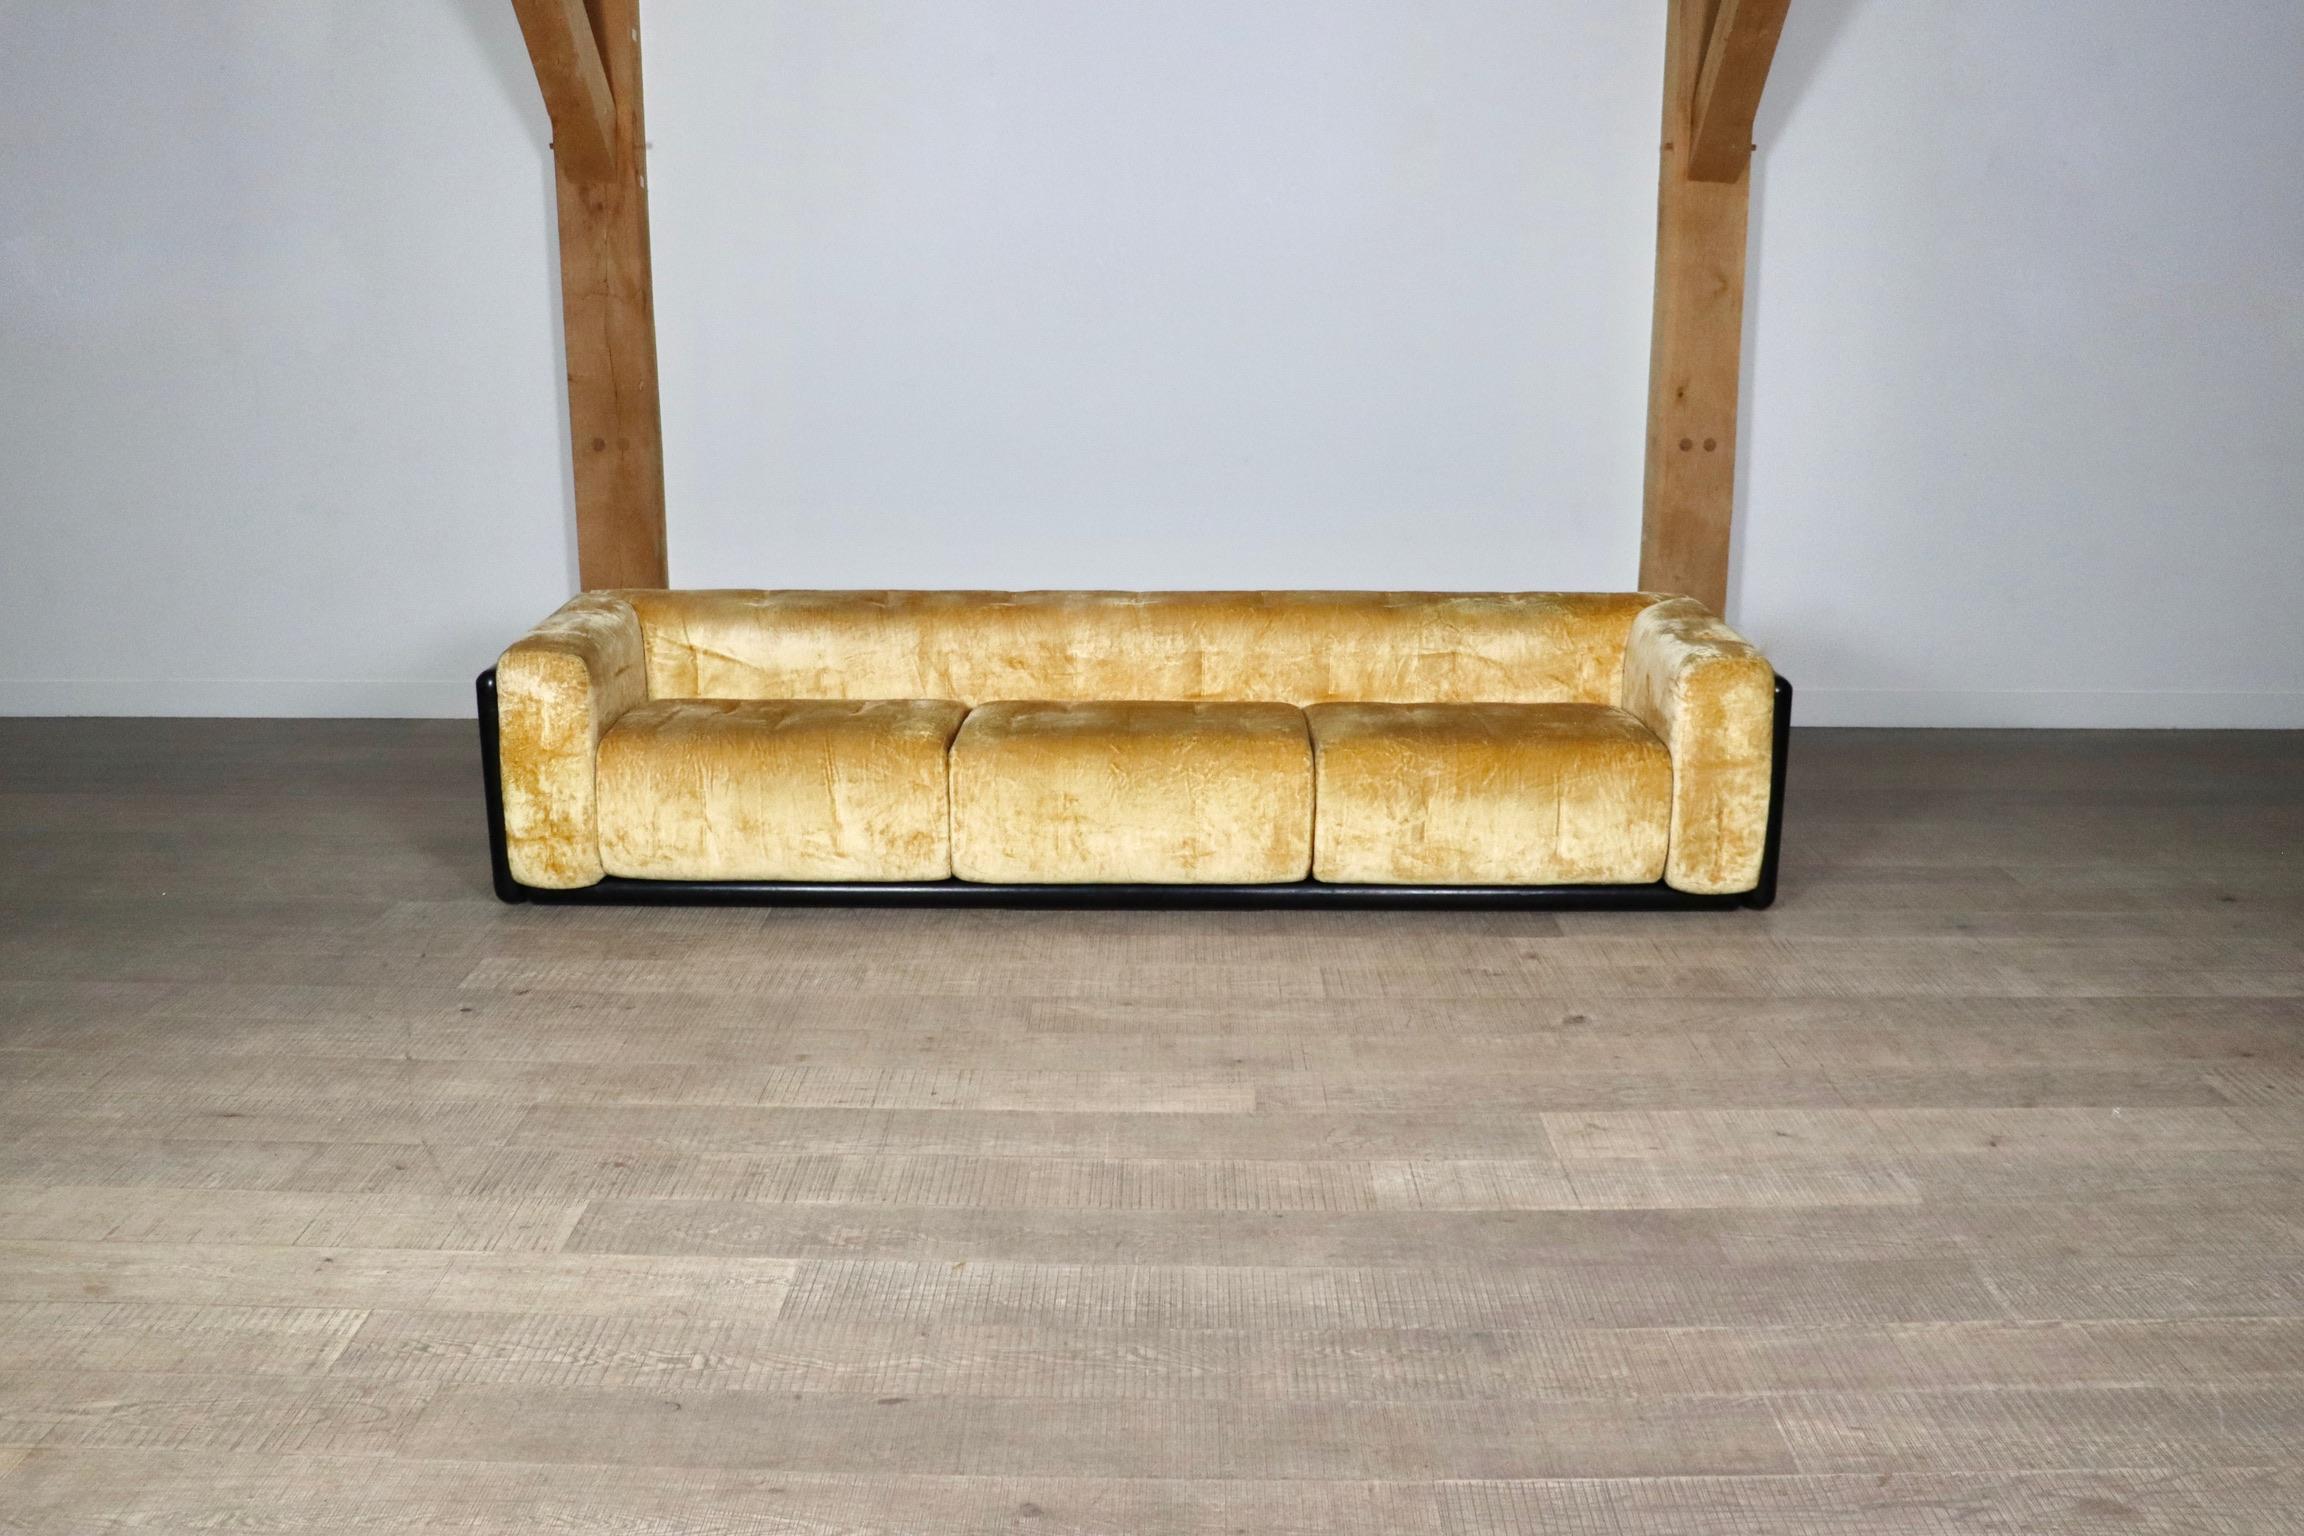 Impressive Cornaro sofa in original warm yellow velvet designed by architect Carlo Scarpa and manufactured by Simon Gavina in Italy in 1973. With a solid cylindrical black lacquered ash wooden frame, and the original warm yellow velvet upholstery.